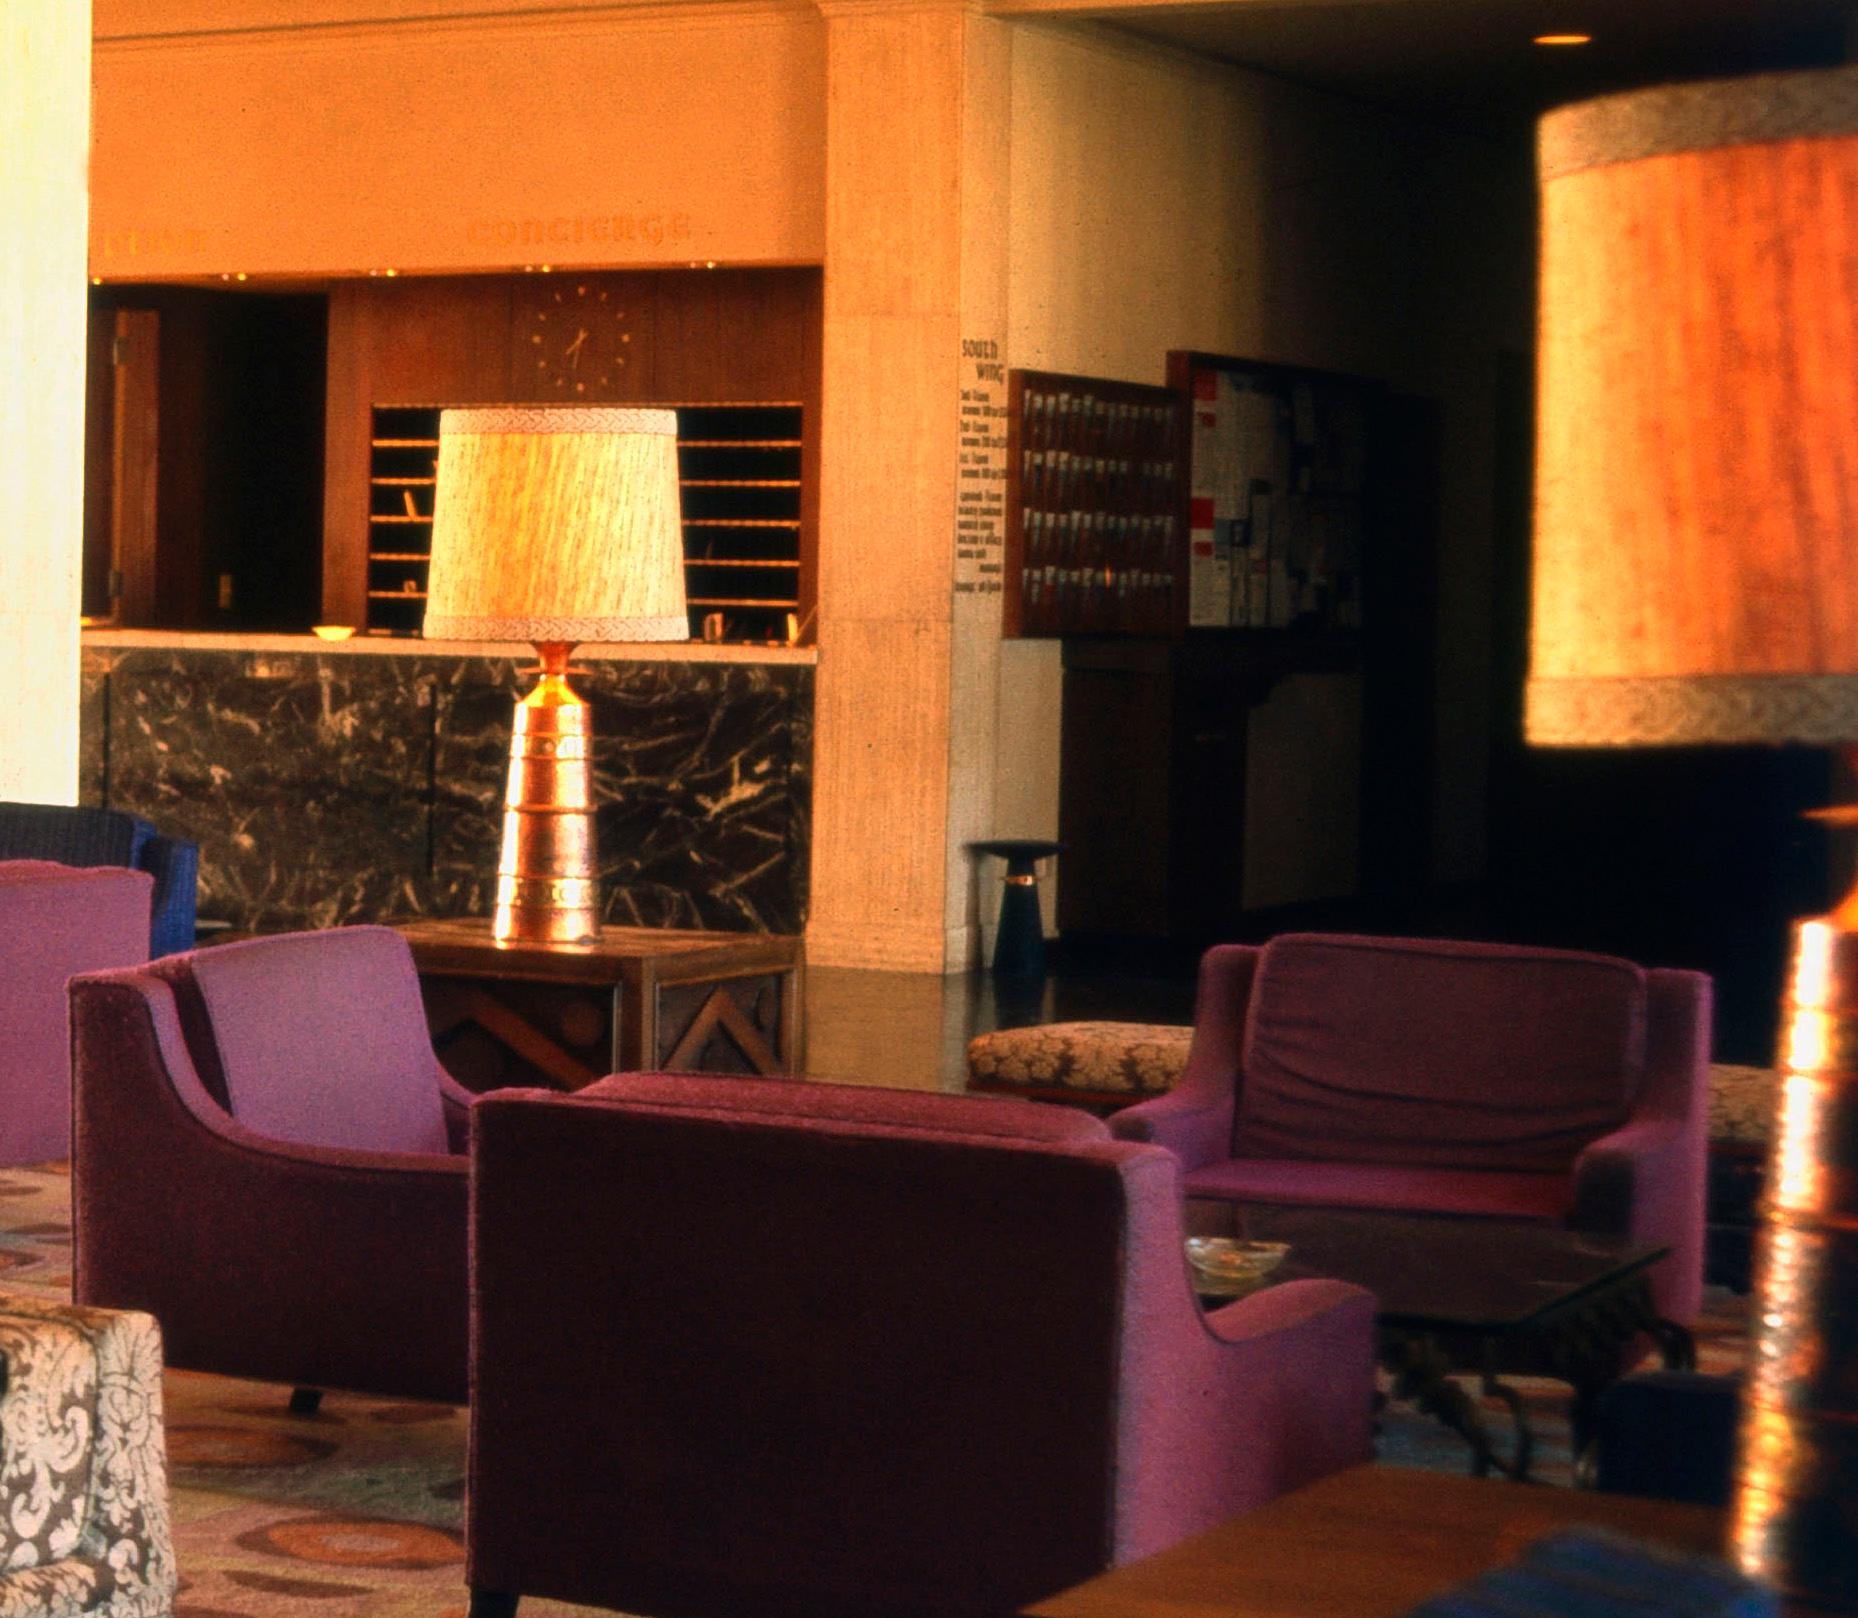 Retro Hotel Lobby of the 1970ies, Limited Edition, Printed Later - Photograph by Walter Rudolph